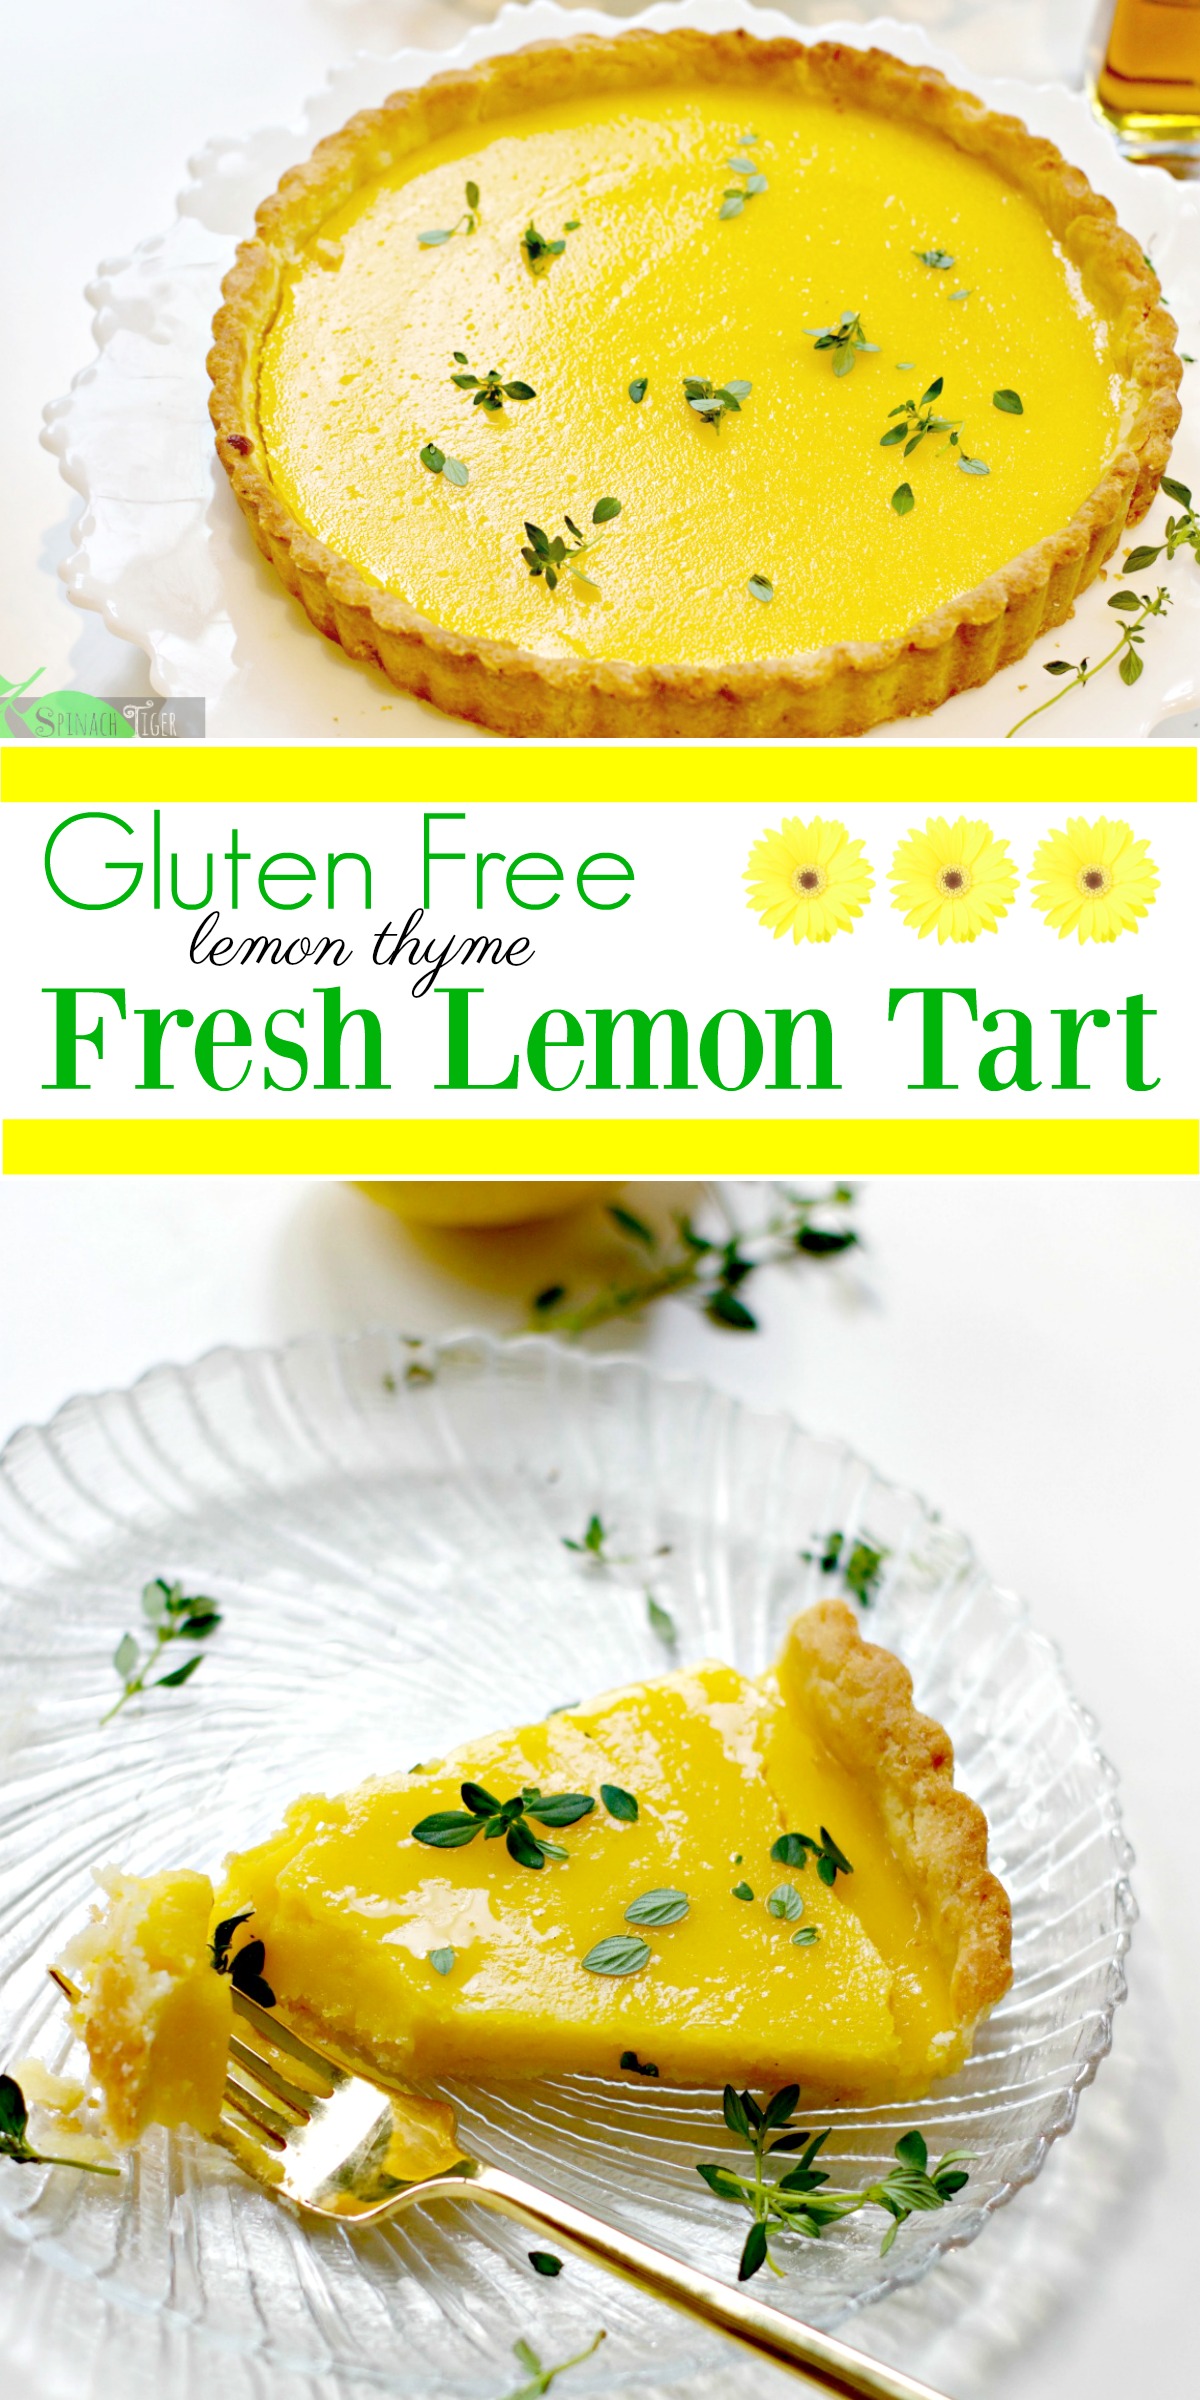 How to Make a perfect gluten free tart crust recipe from Spinach Tiger